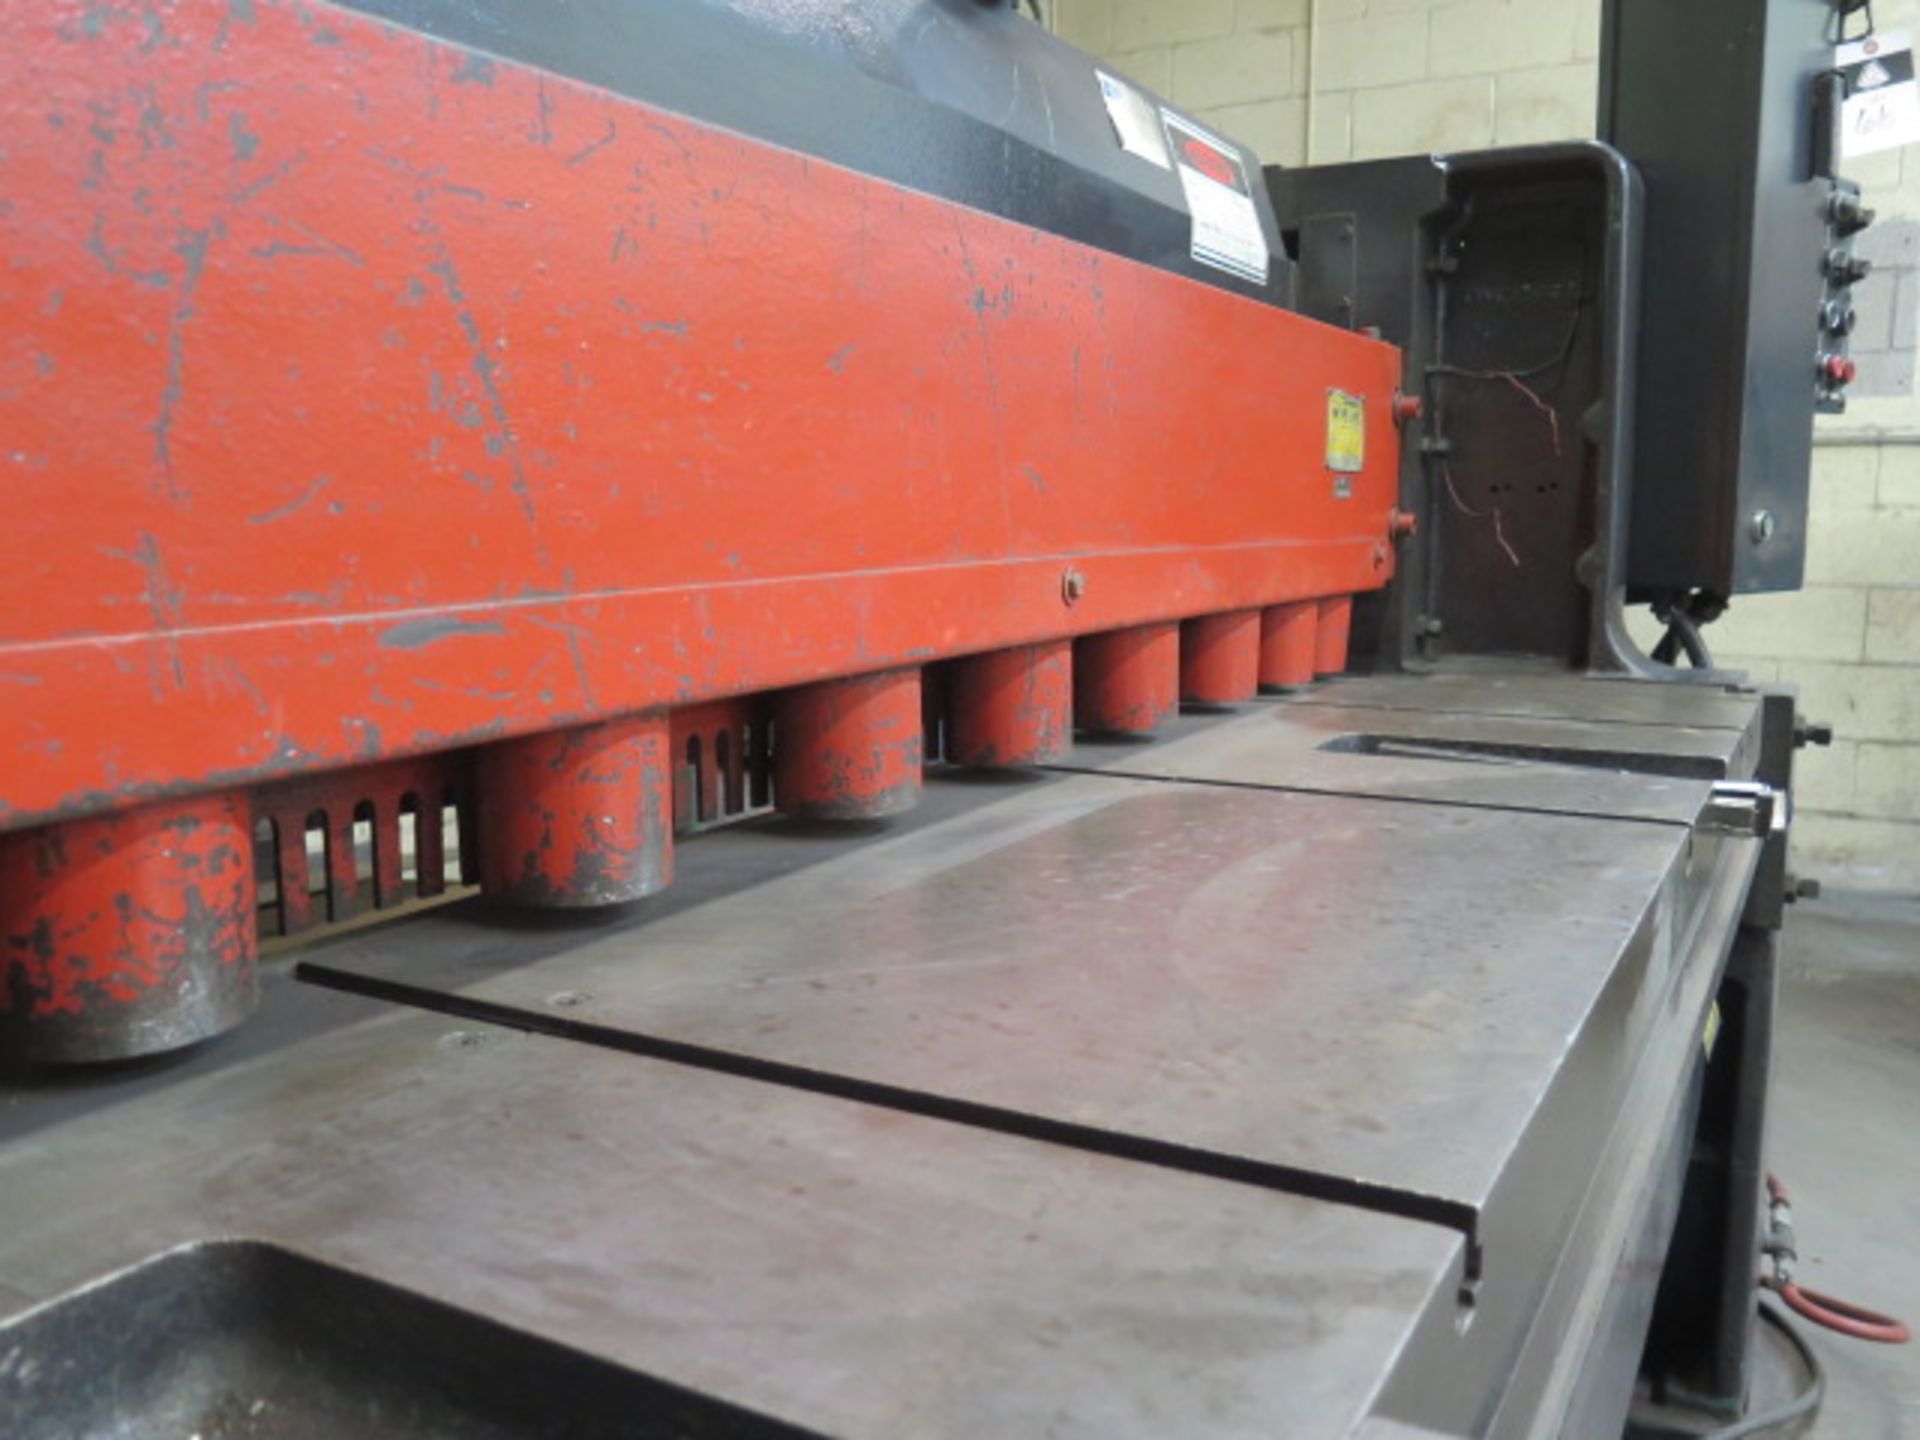 Wysong mdl. 1010 10GA (3/16”) x 10’ Power Shear s/n P32-1540 w/ Dial Power Backgauge, SOLD AS IS - Image 5 of 10